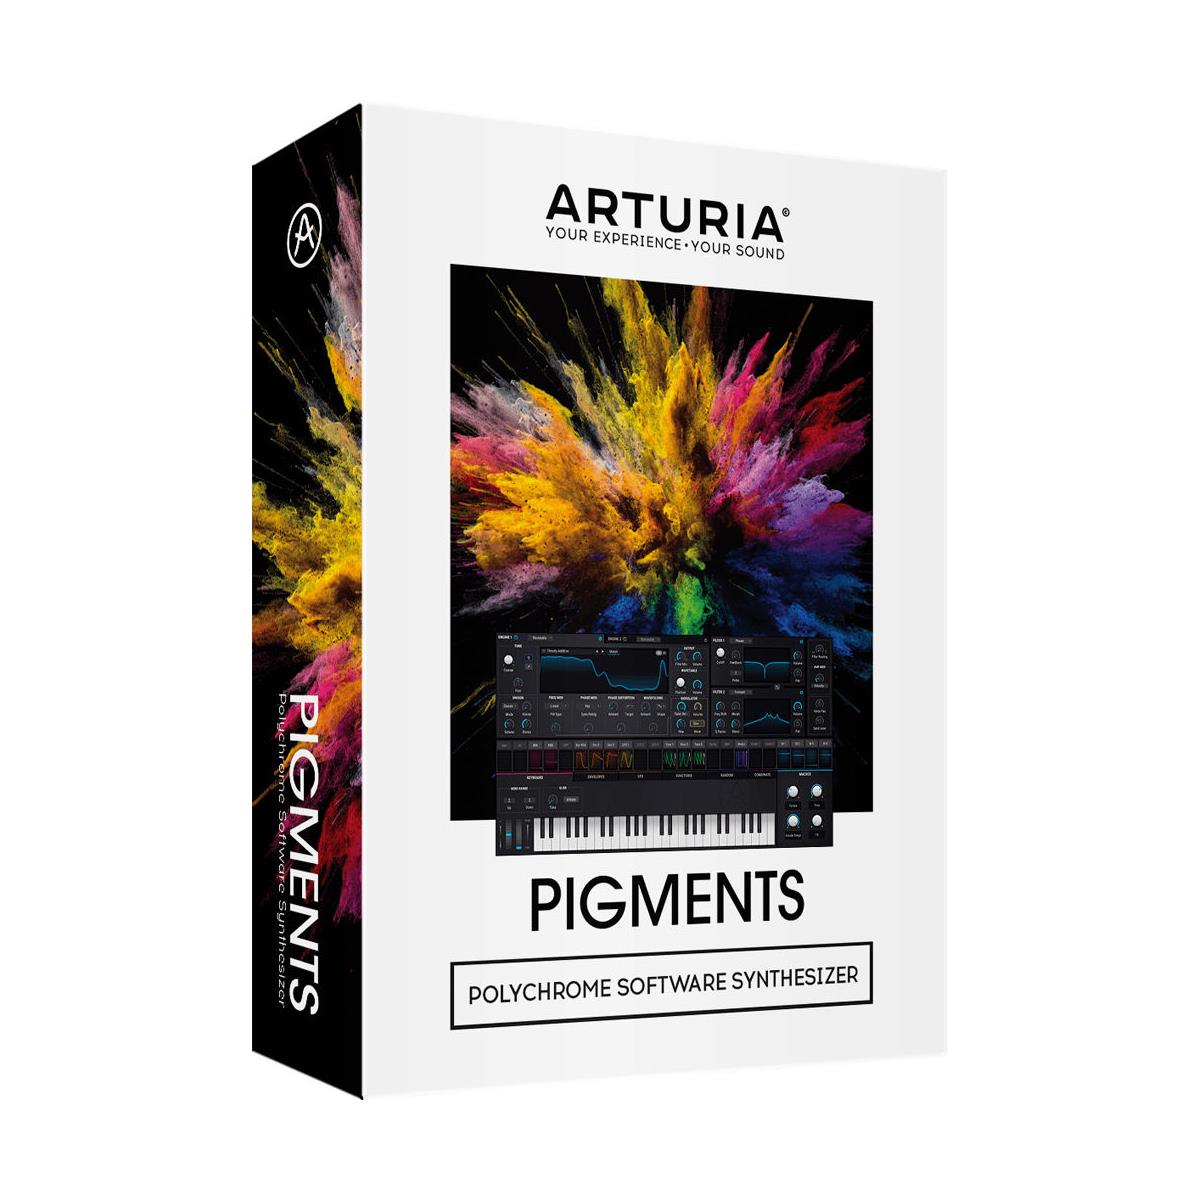 Image of Arturia Pigments Polychrome Software Synthesizer